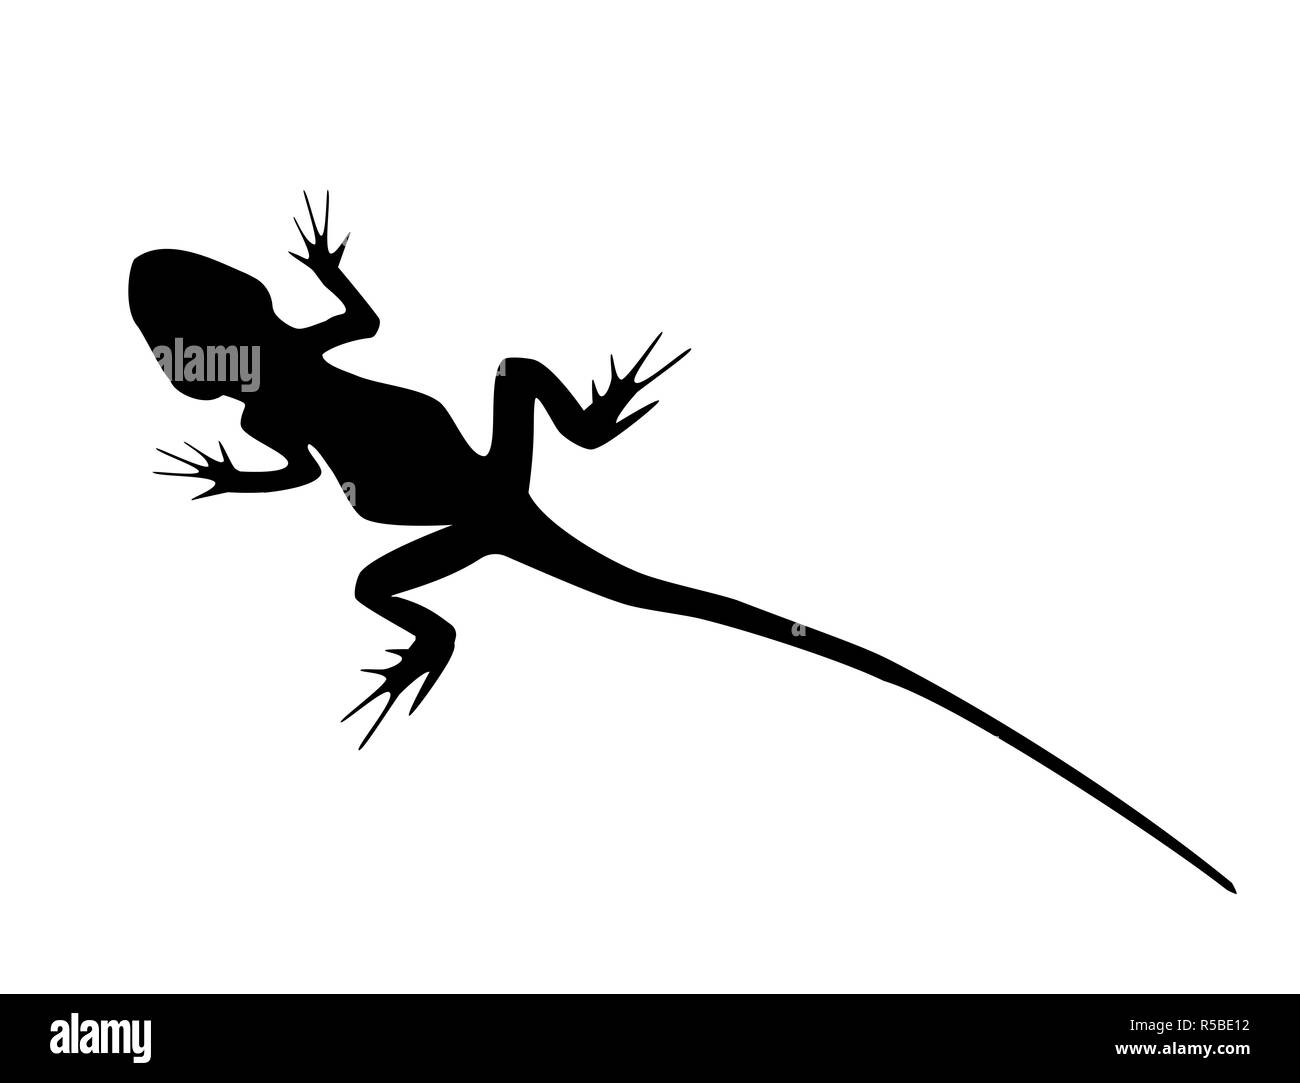 Lizard with long tail wild animal black silhouette isolated on white background. Simple outline drawn reptile, logo icon illustration Stock Photo